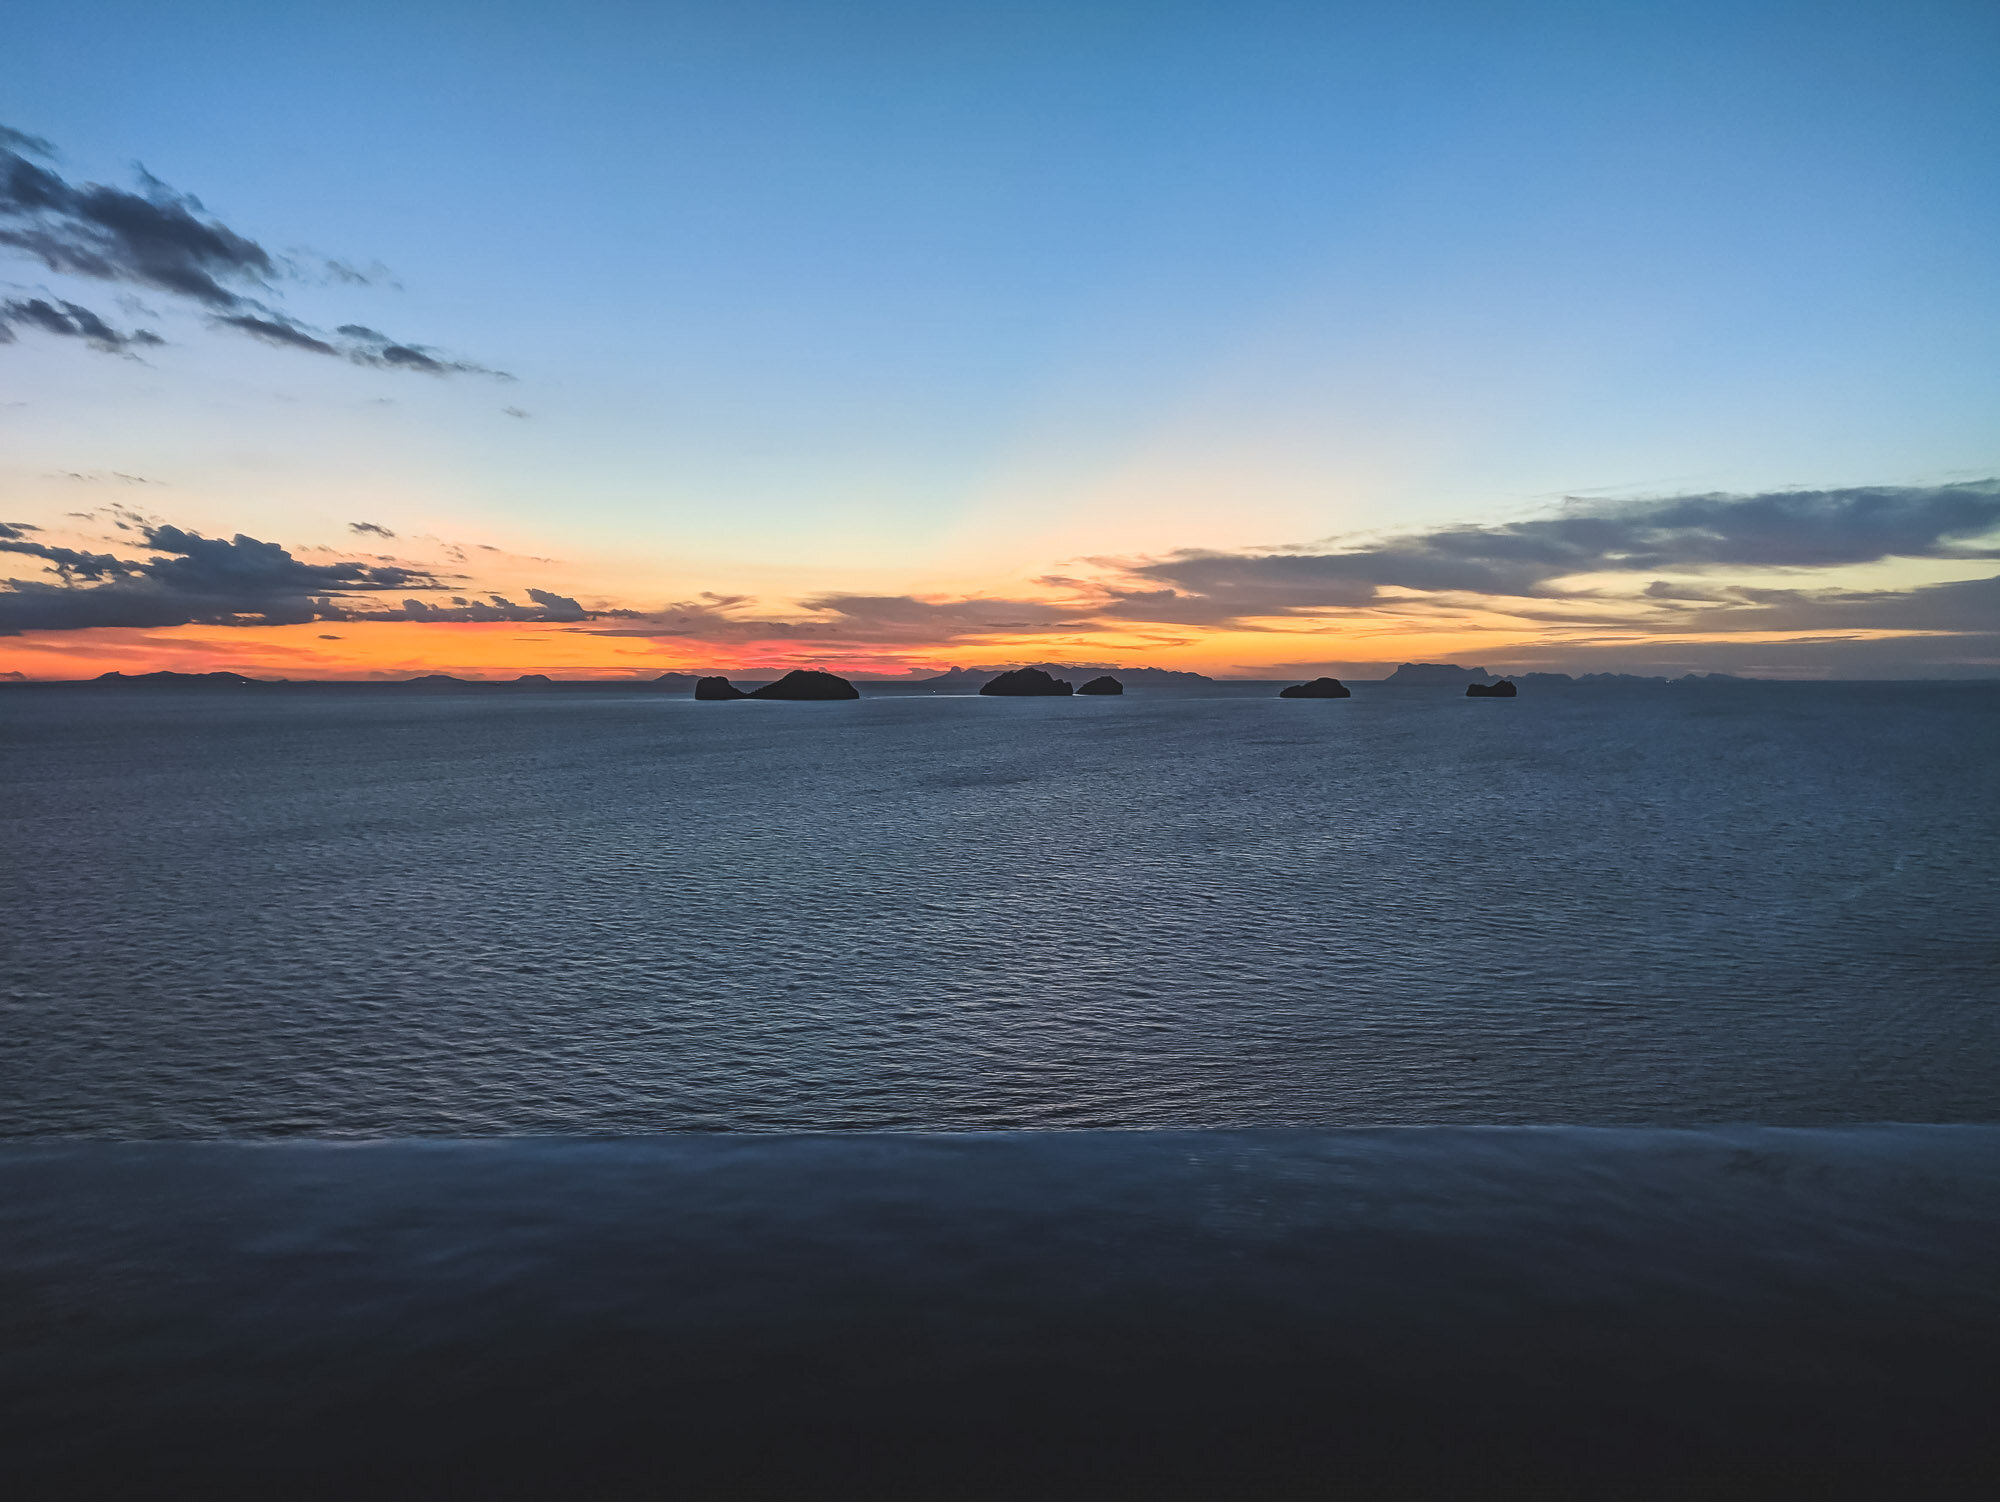 The five islands against a beautiful sunset